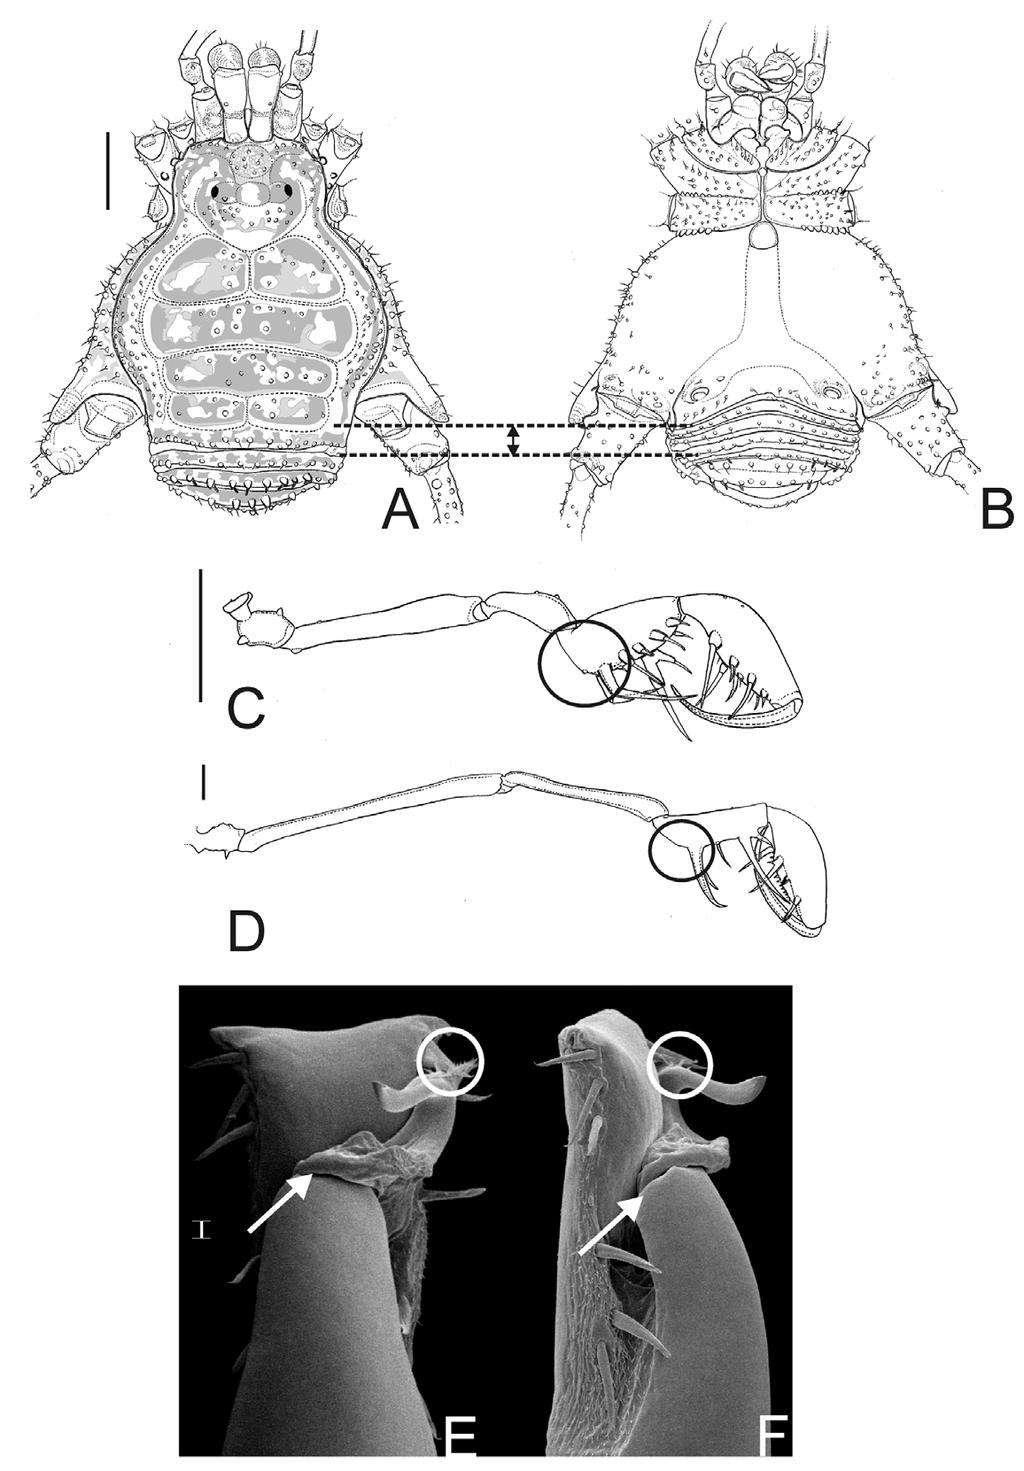 FIGURE 14. Some characters used in the cladistic analysis. Nanophareus bipartitus sp. nov.: A, habitus, dorsal view; B, idem, ventral view.